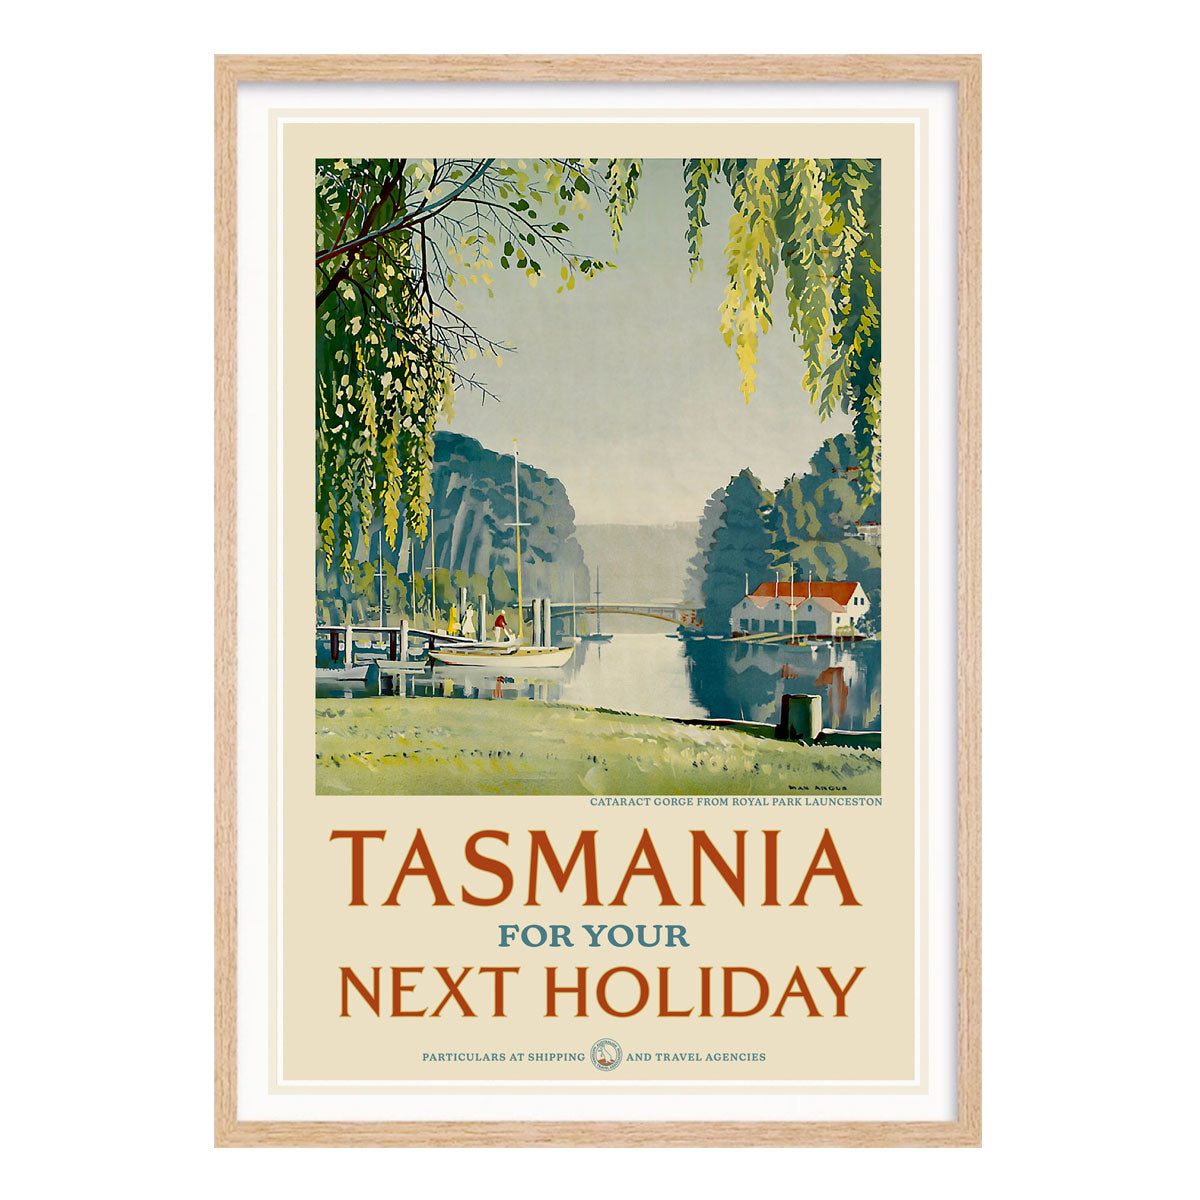 Tasmania nextholiday vintage advertising poster in oak from Places We Luv